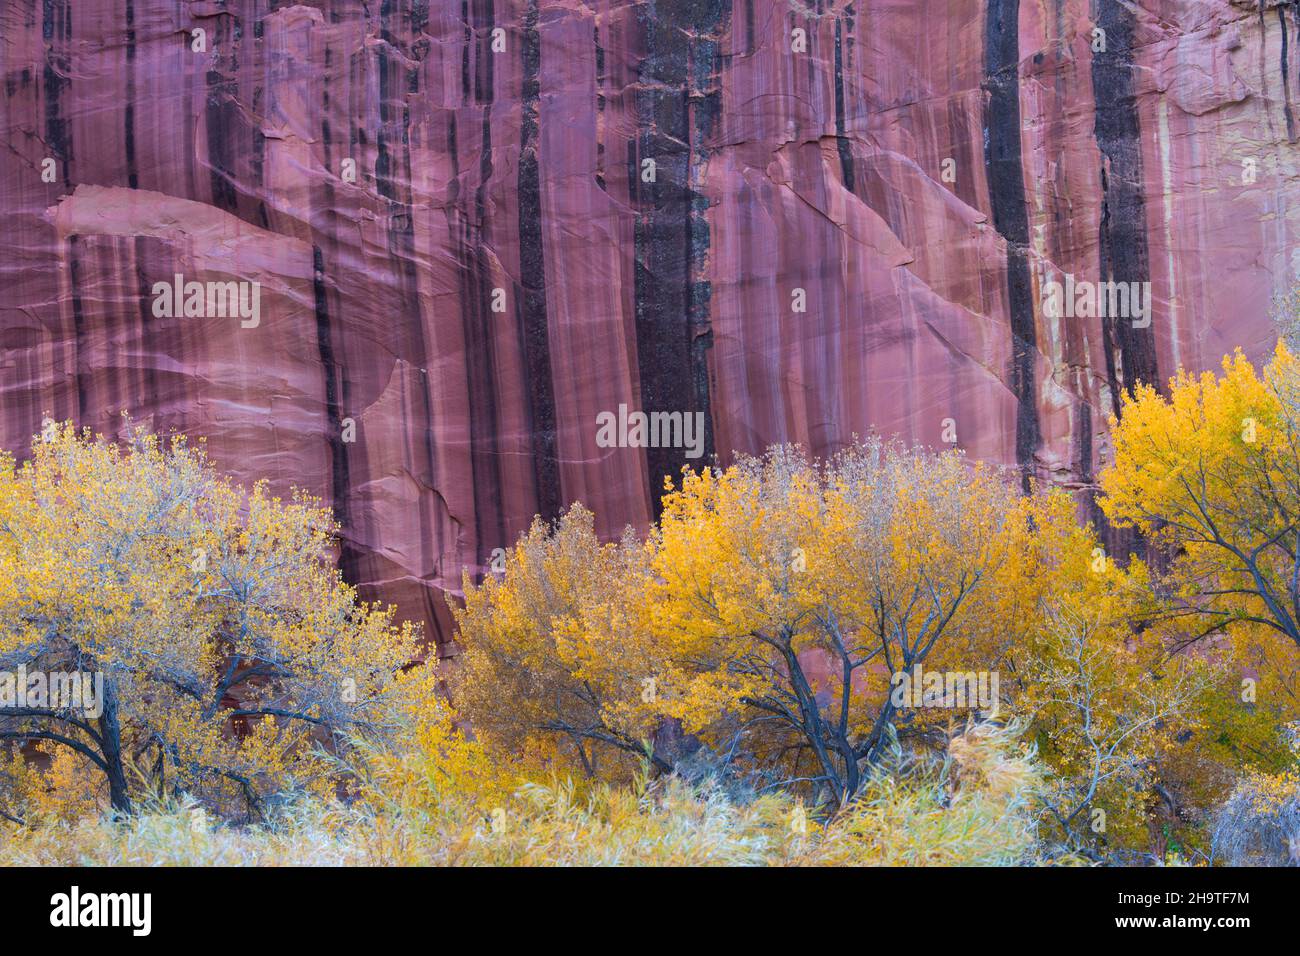 Fruita, Capitol Reef National Park, Utah, USA. Golden cottonwood trees dwarfed by the streaked sandstone wall of the Fremont River Canyon, autumn. Stock Photo